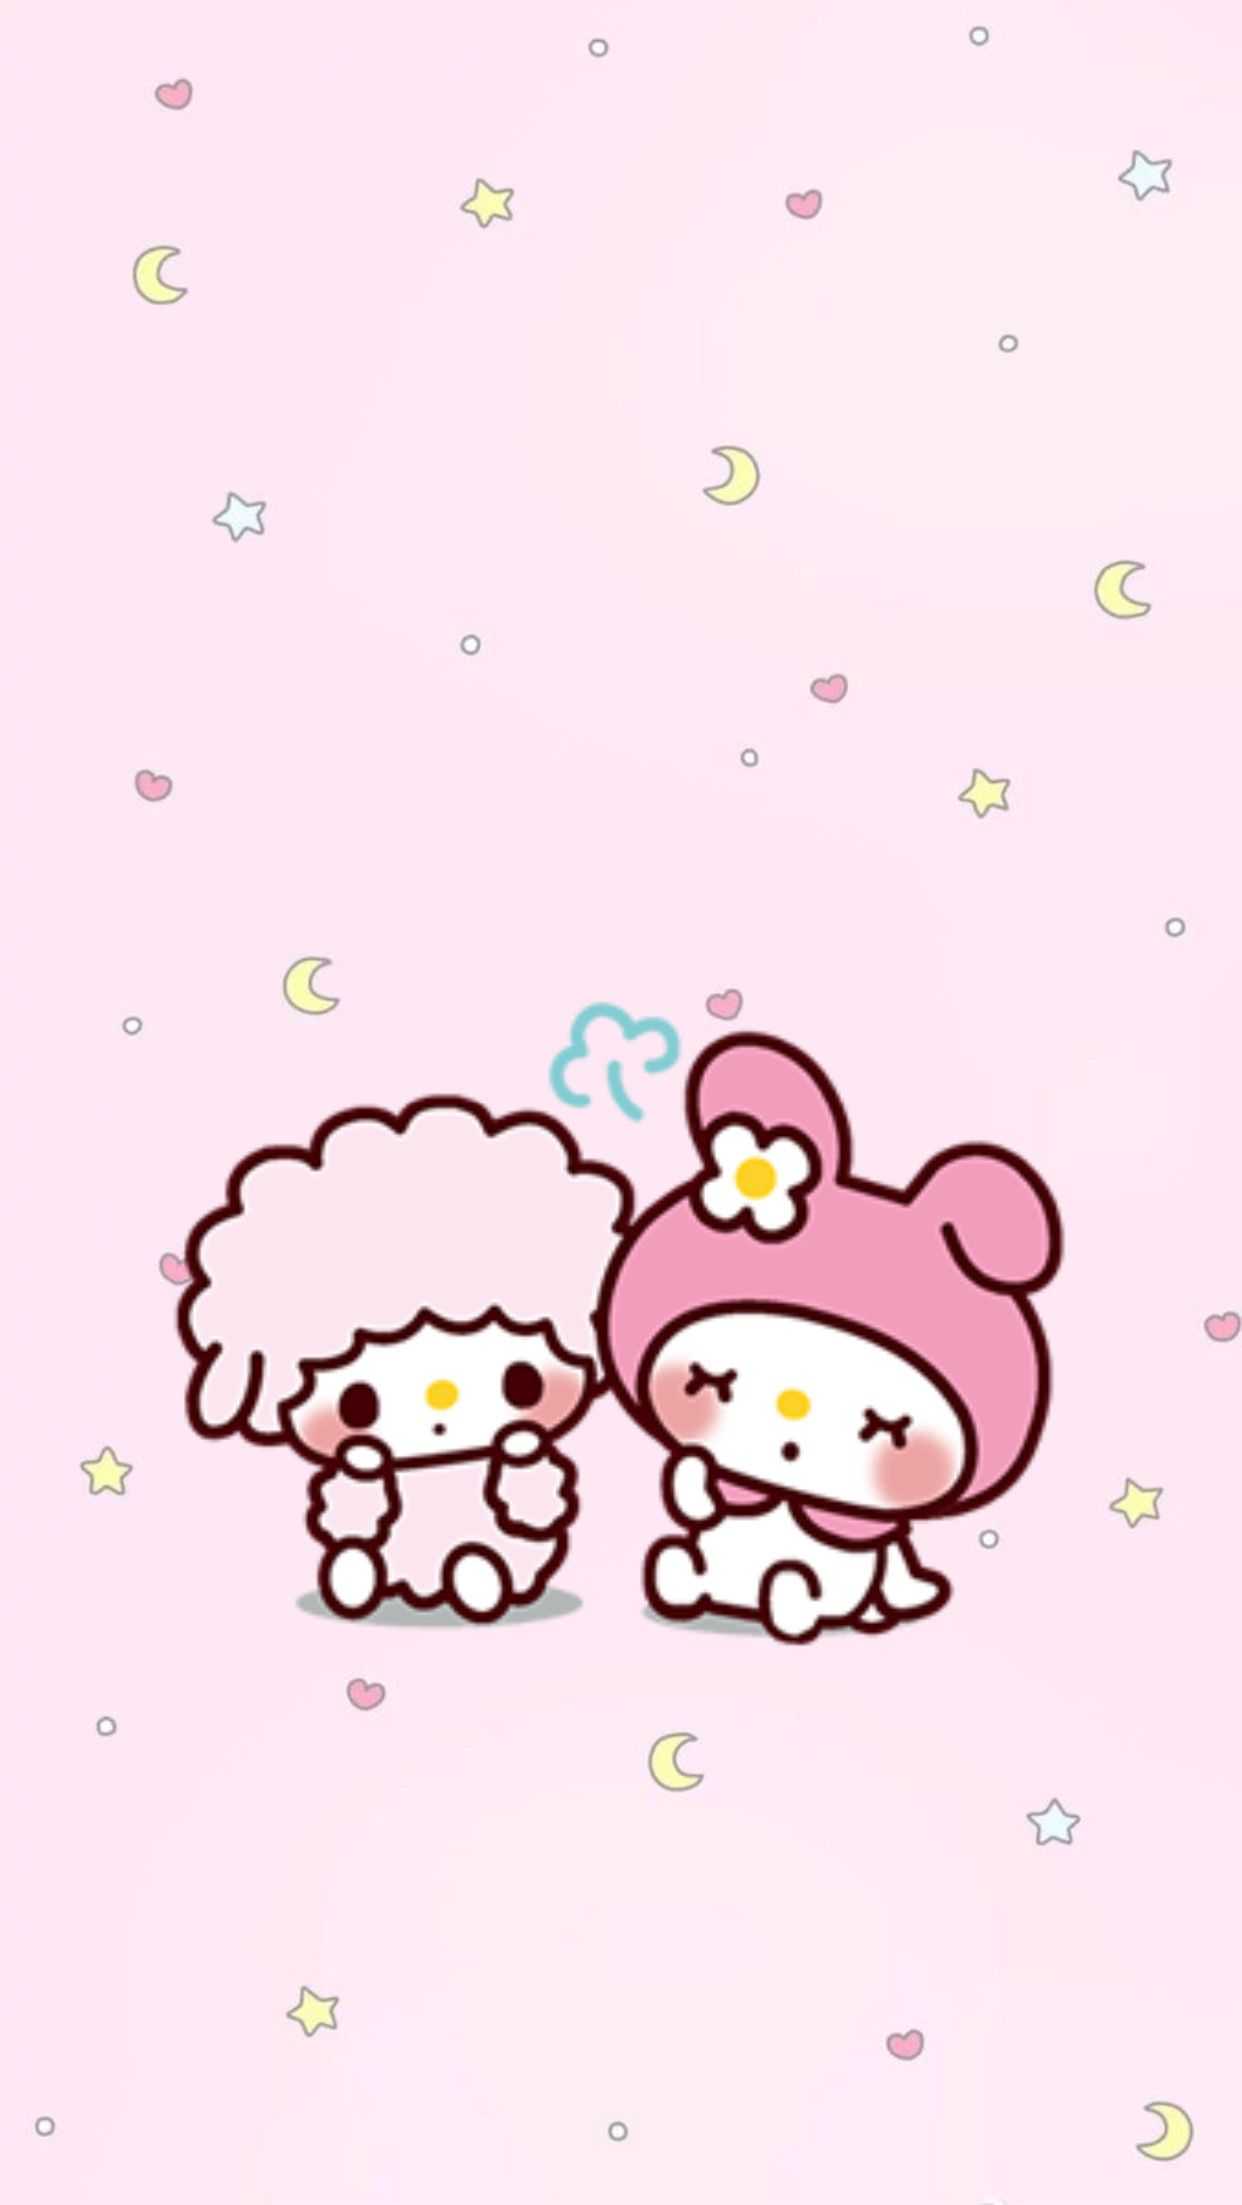 Sanrio Characters iPhone Wallpaper with high-resolution 1080x1920 pixel. You can use this wallpaper for your iPhone 5, 6, 7, 8, X, XS, XR backgrounds, Mobile Screensaver, or iPad Lock Screen - My Melody